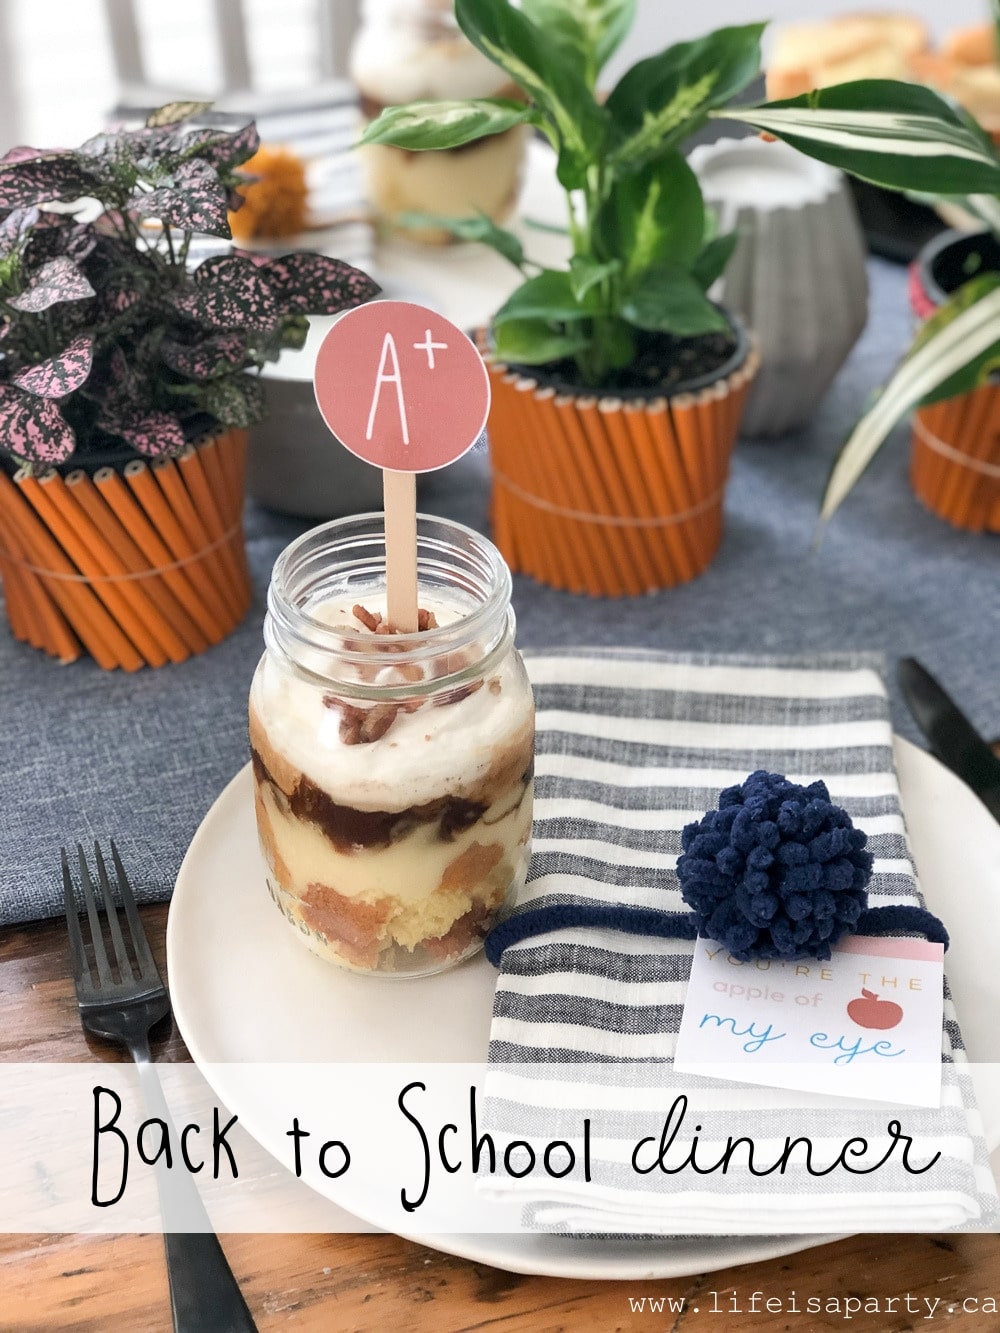 Back To School Printables and Family Dinner: decor ideas, dinner and free printable Back To School printables, and "All About Me" sheet.